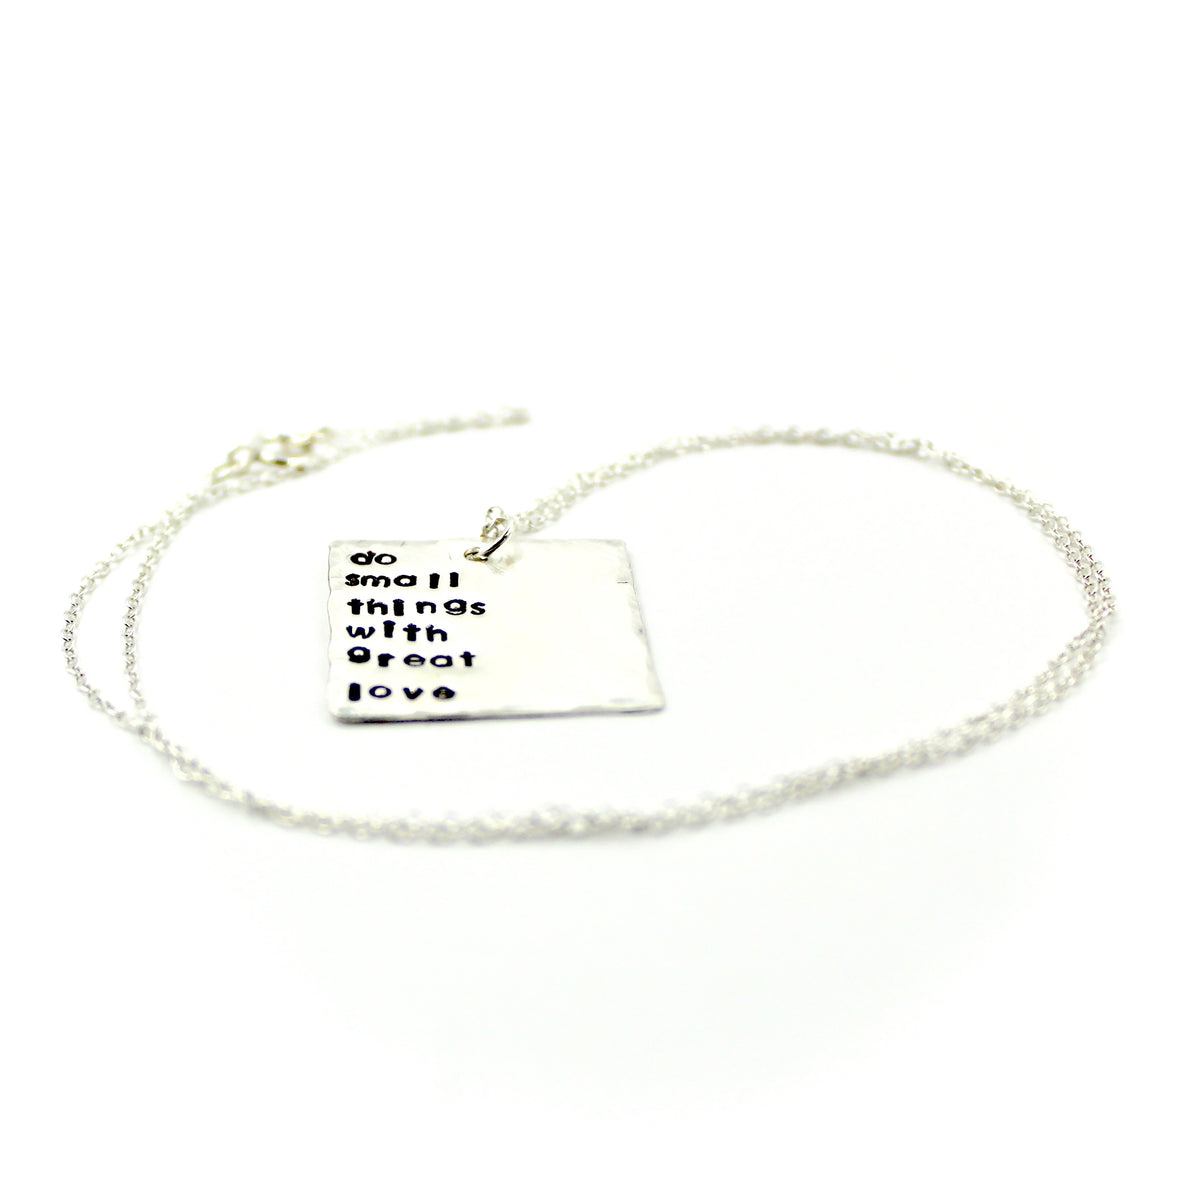 Do small things with great love Square Necklace